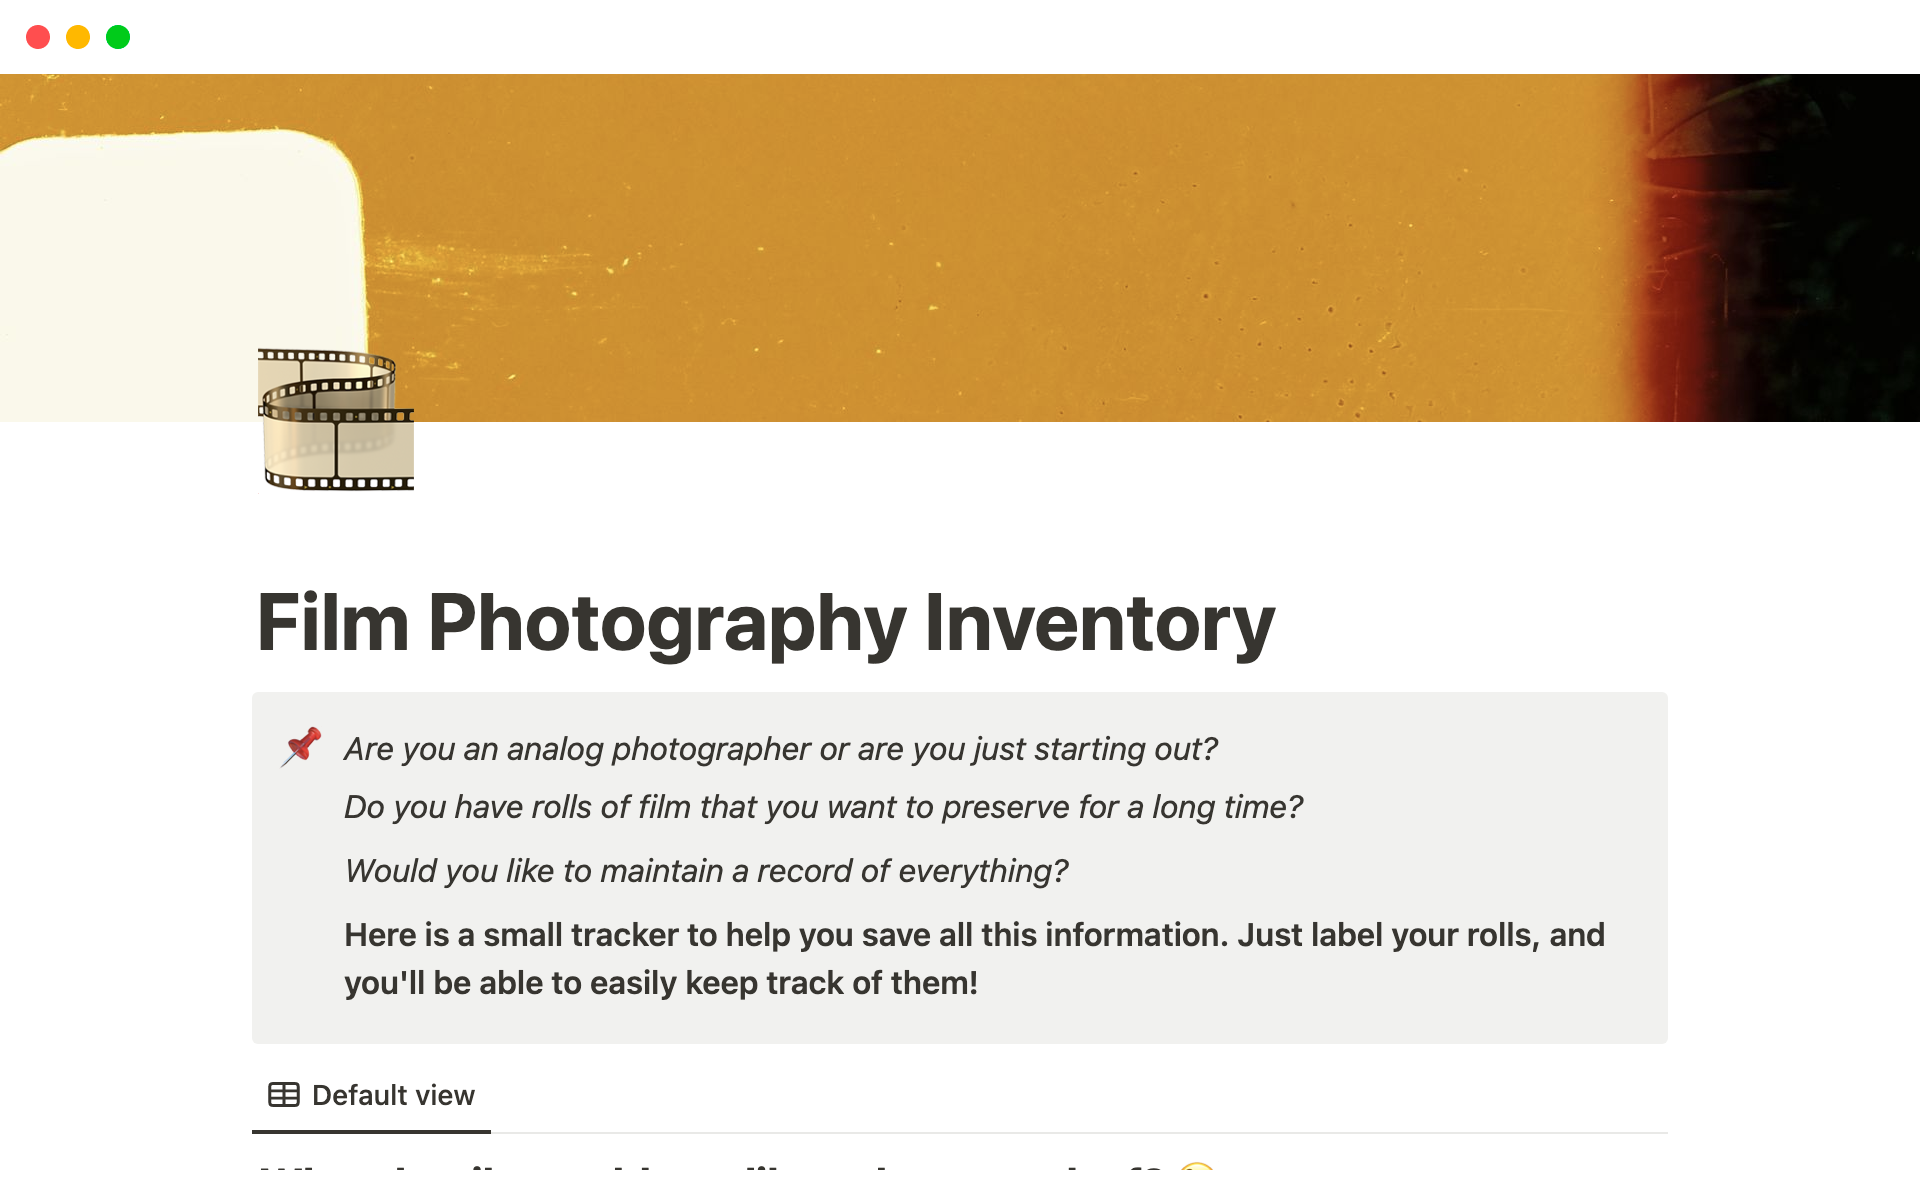 It's a template to record information about the film photography rolls you have. It allows you to organize the information of each film: how it was used, what it was used for, costs, and more!